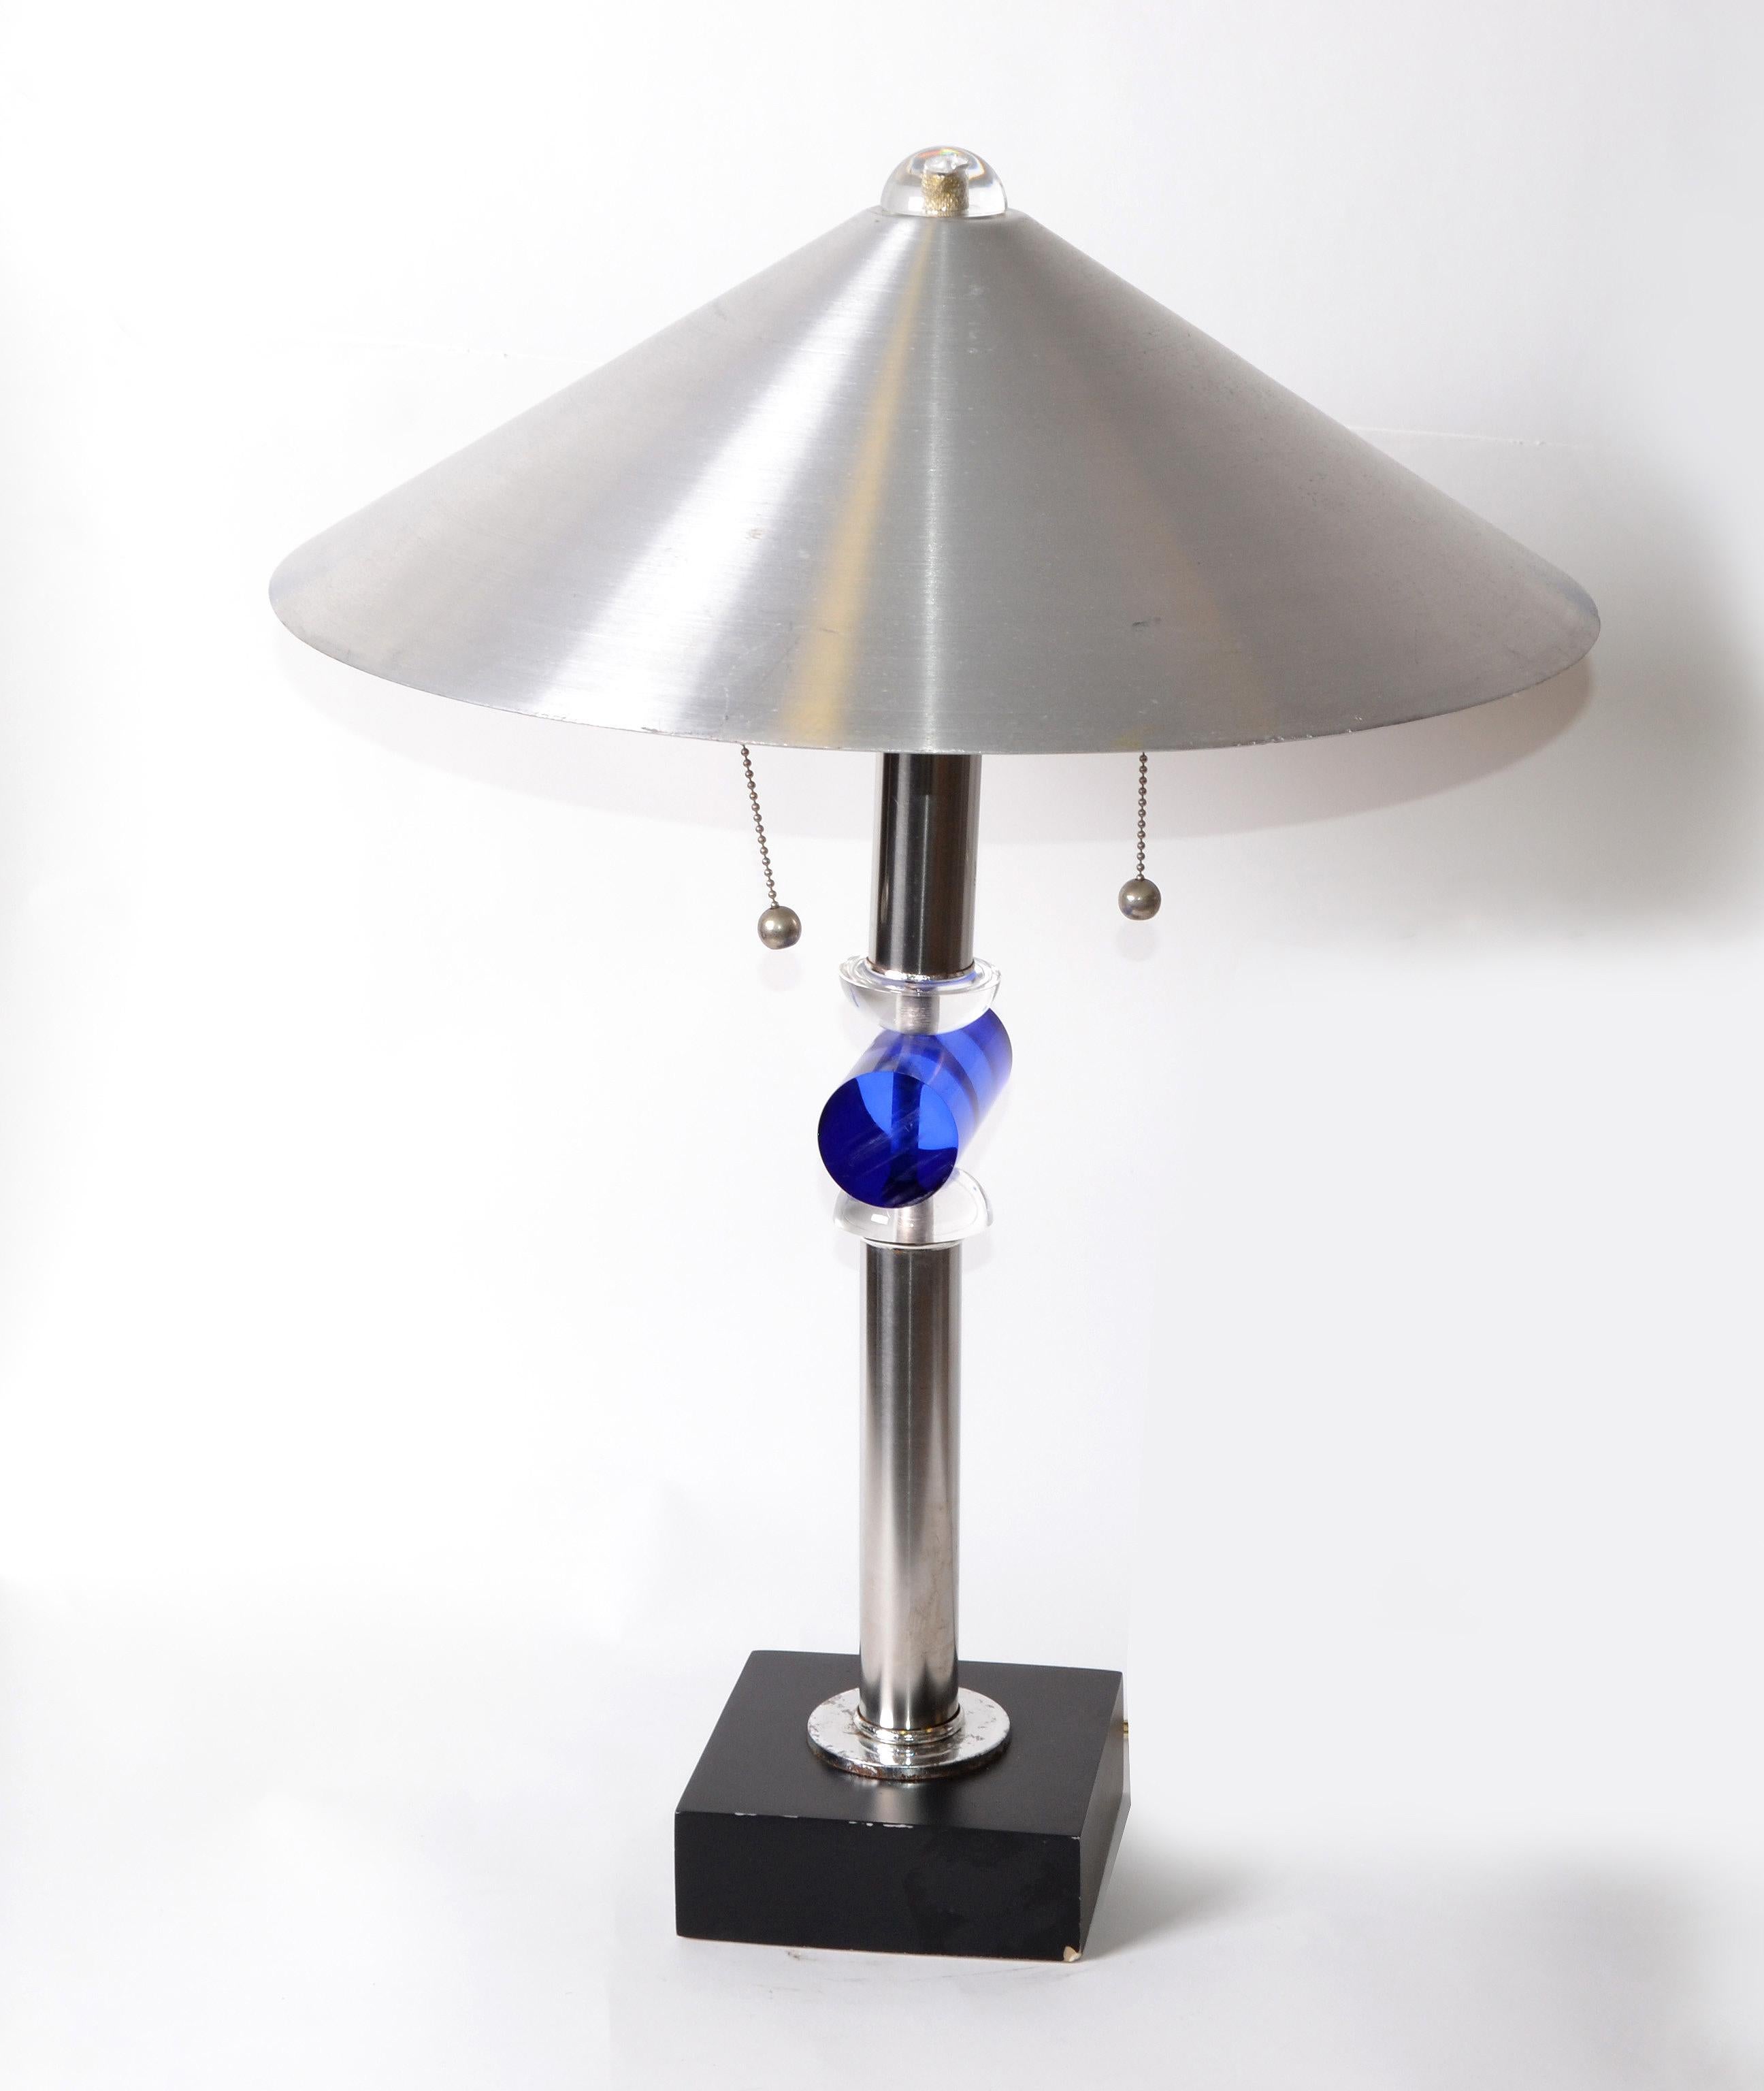 Van Teal circa 1970s, this clear and blue Lucite, geometric-style table lamp on a black wooden base, 
Double Sockets with pull strings, US wired and uses 2 max. 75 watts light bulbs.

Brushed aluminum shade: 18.5 inches diameter x 6.5 inches